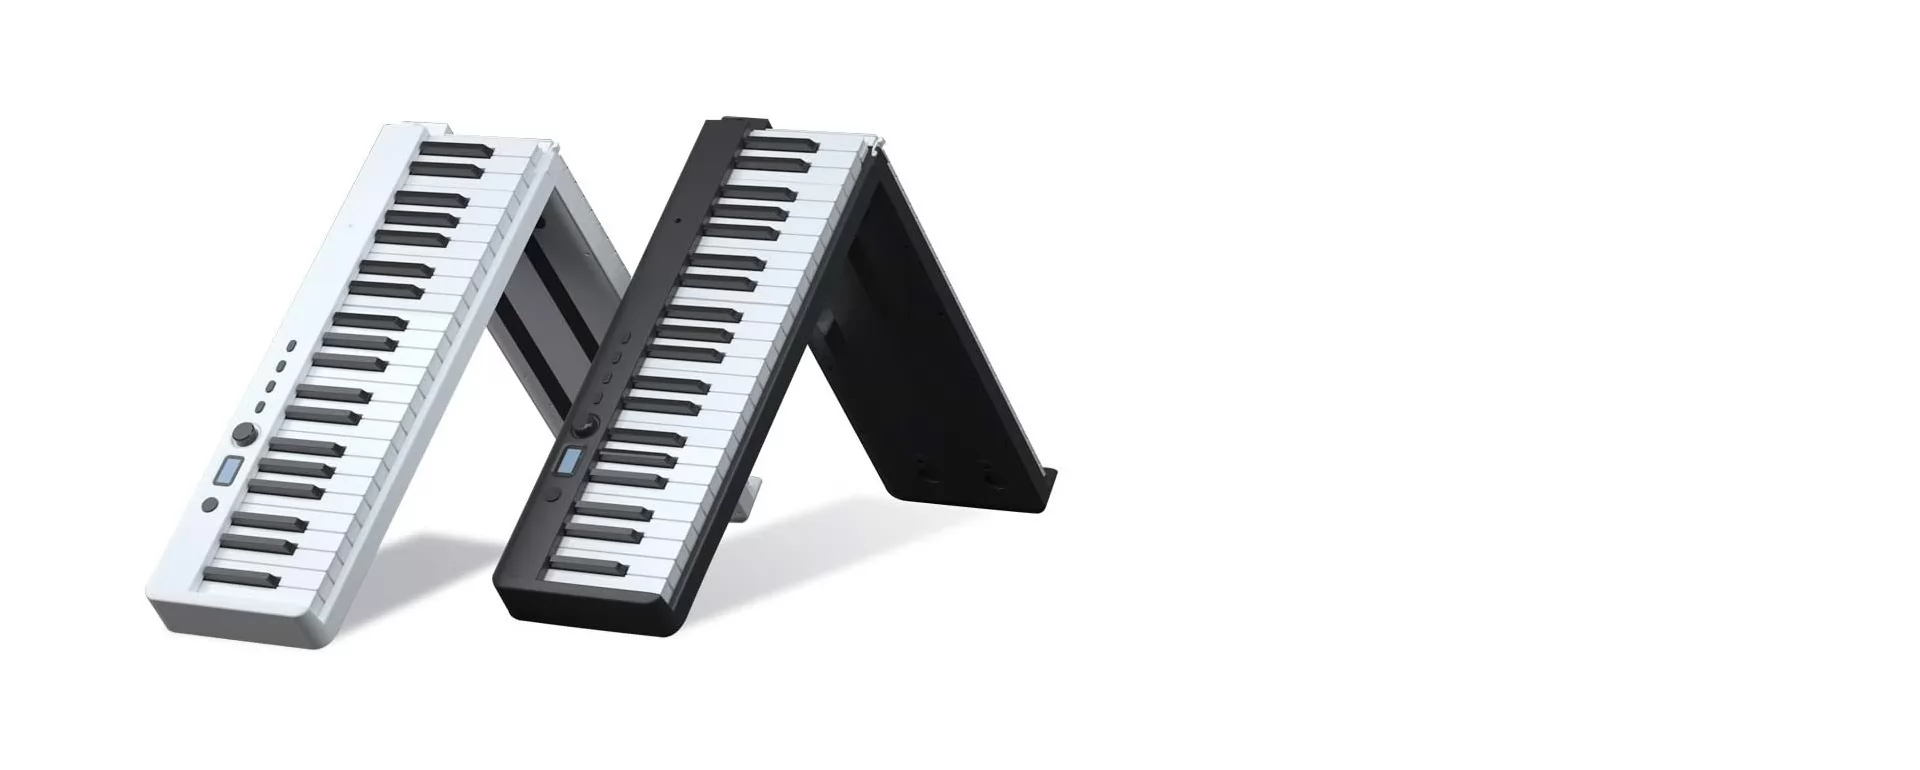 New Generation Portable Piano<br />
88 key foldable electric solid piano